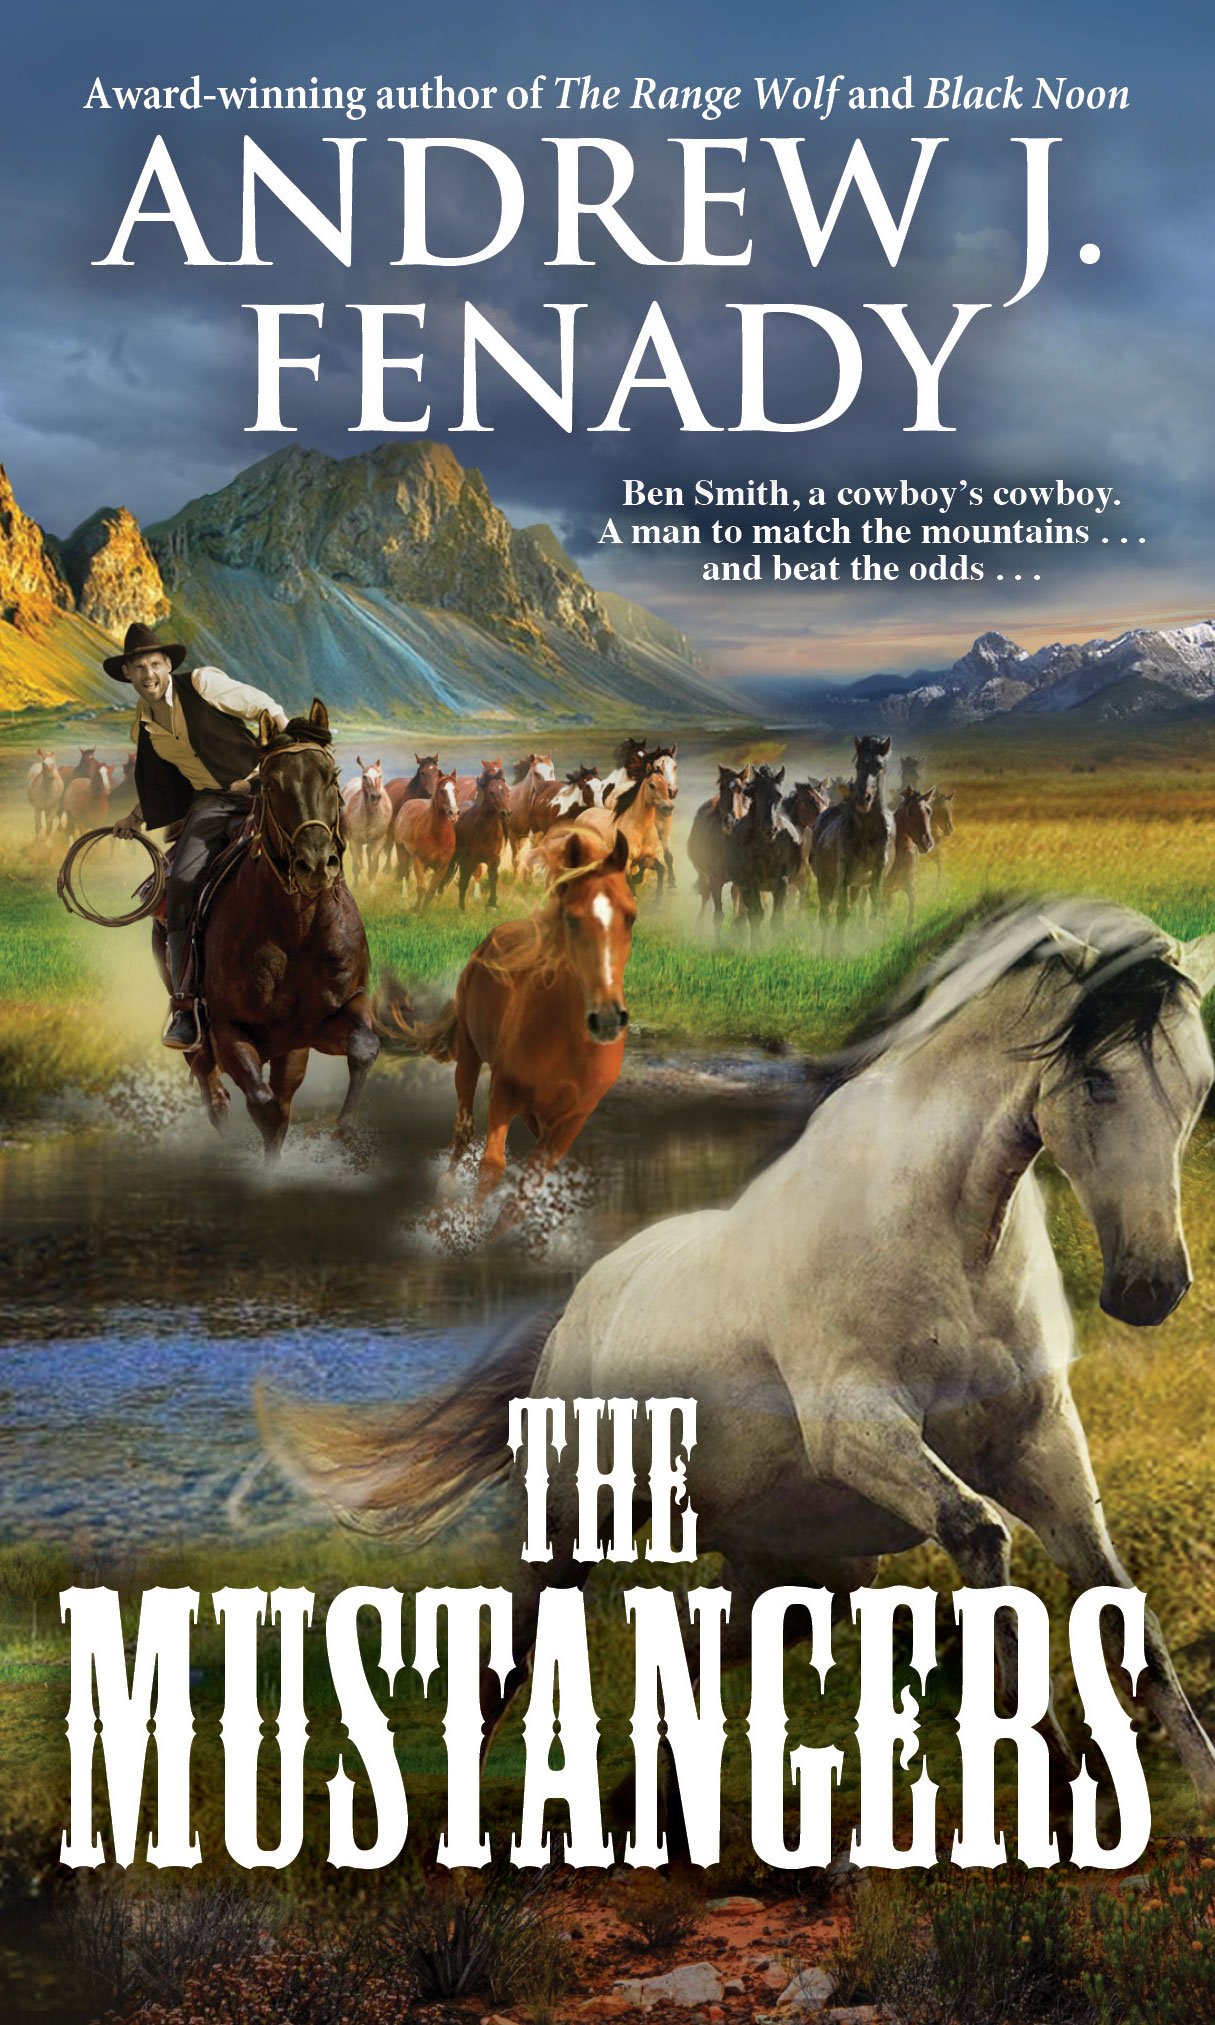 THE MUSTANGERS by Andrew J. Fenady 